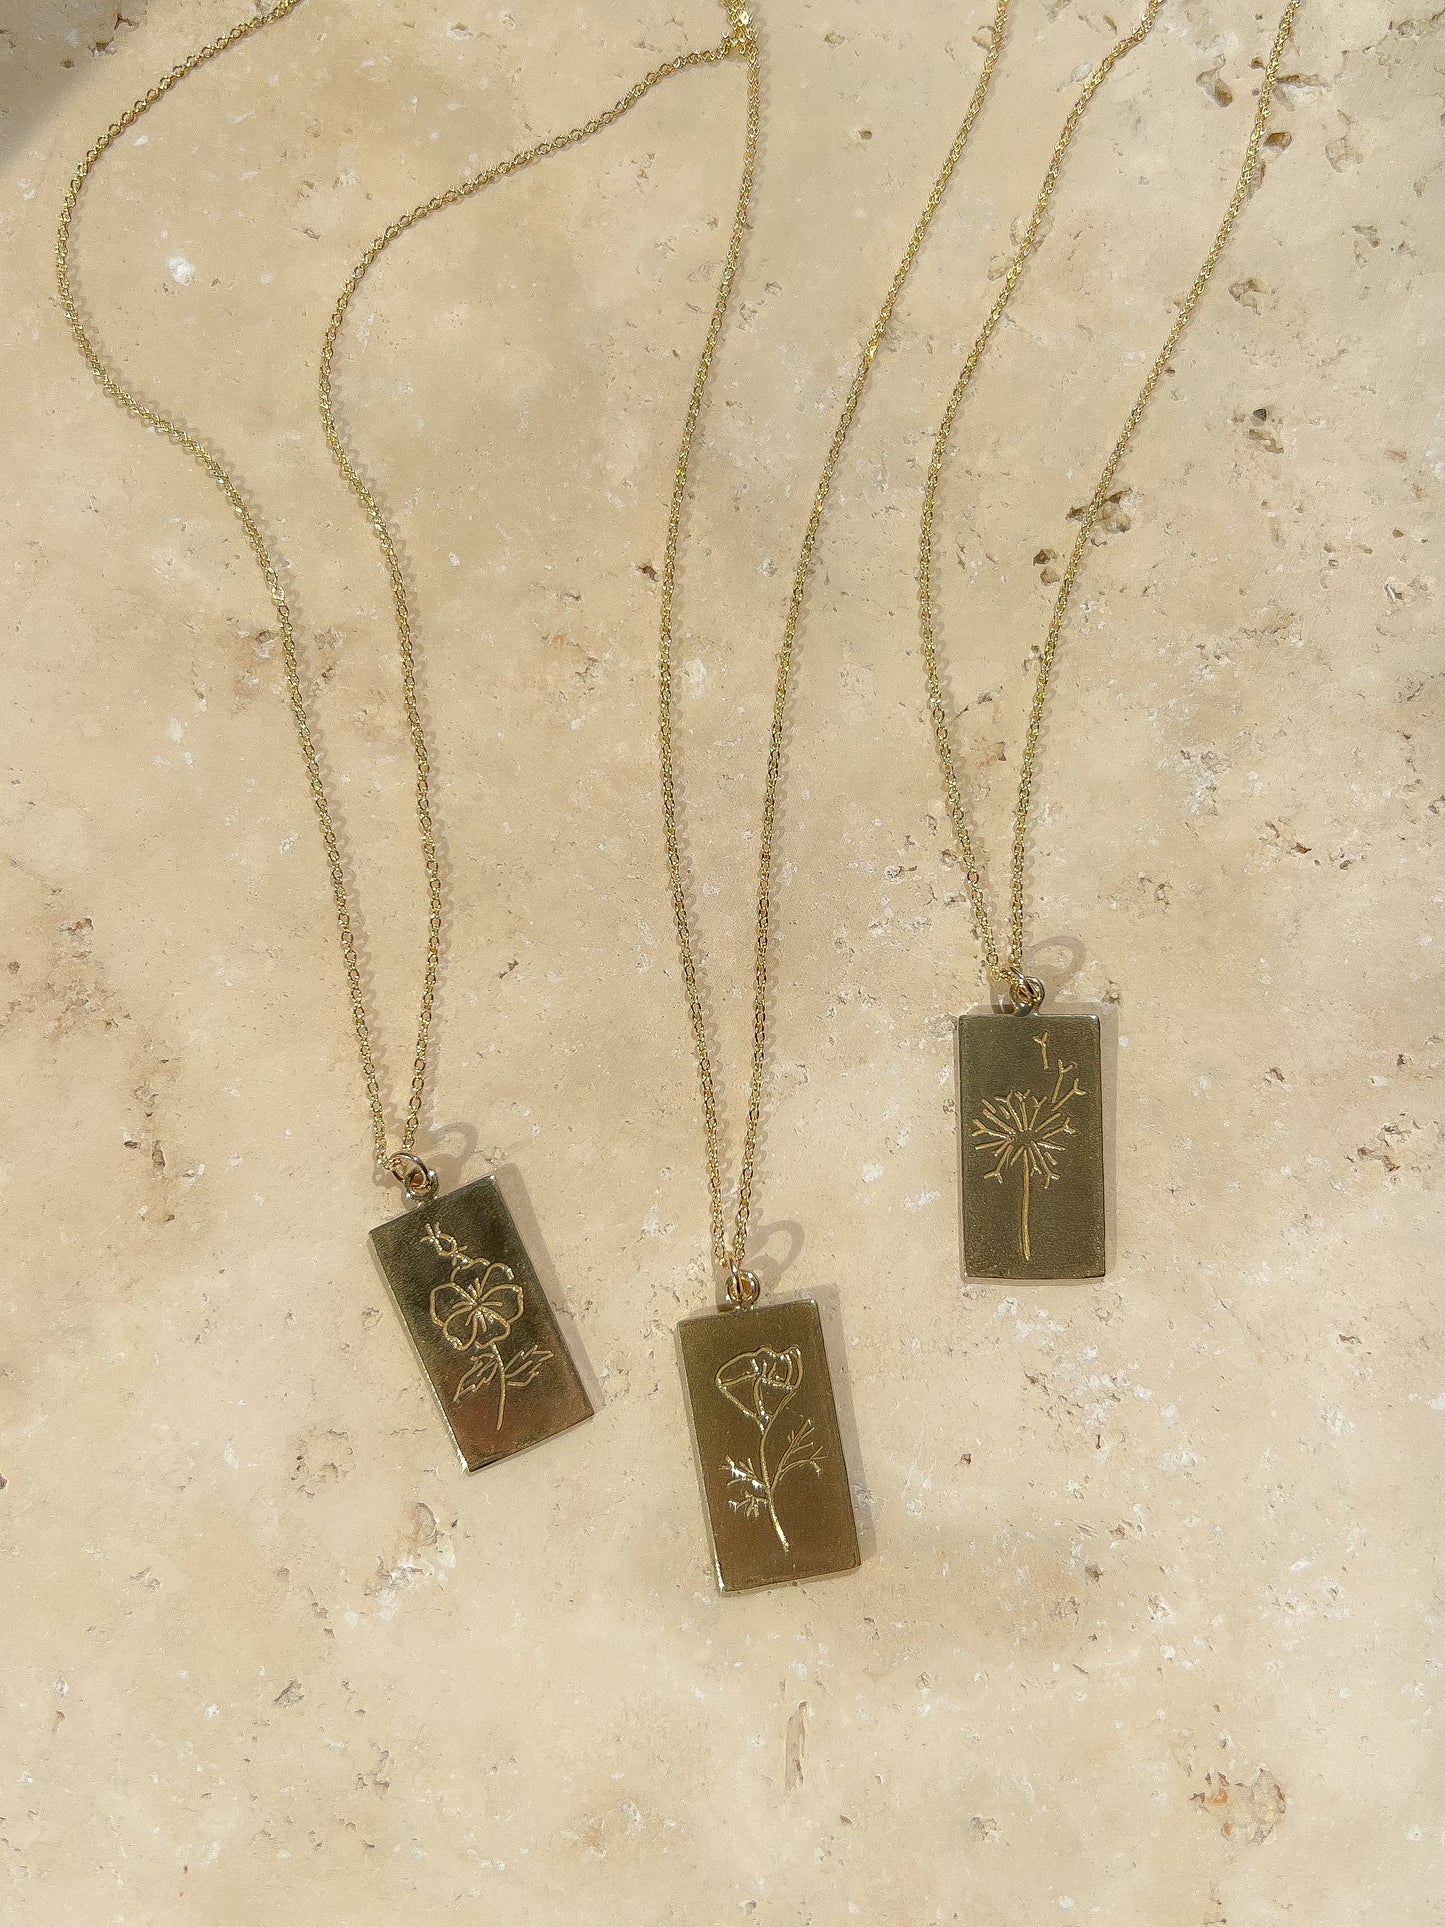 Handmade bronze tarot necklace featuring a wild rose. A tarot card from the plant world to adorn your neck. Hand carved in wax from original drawings by Arwyn Moonrise and sustainably made in northern California by Amanda Hunt.